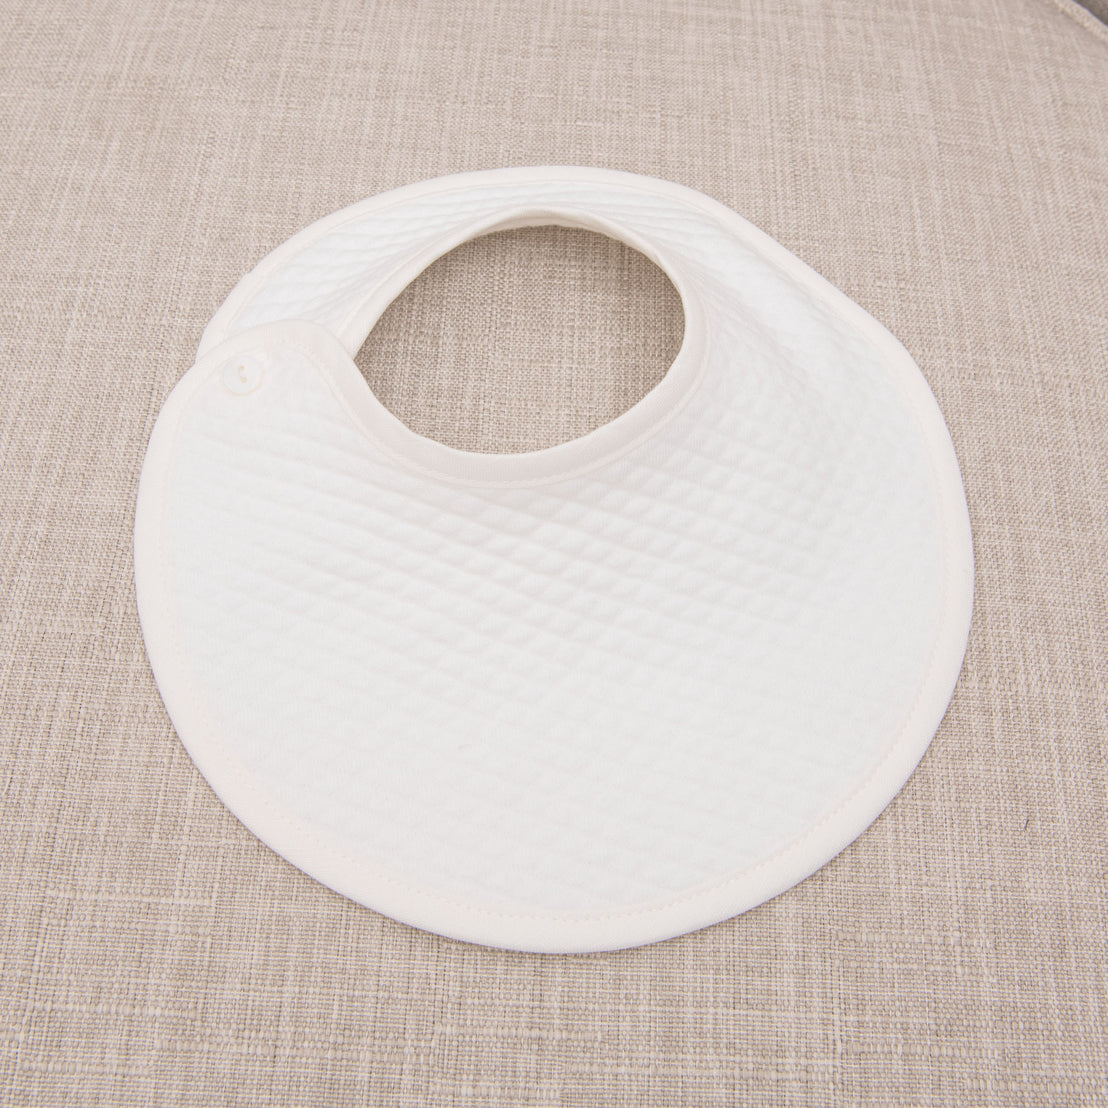 Boys baptism bib in white quilted cotton pictured on chair. 